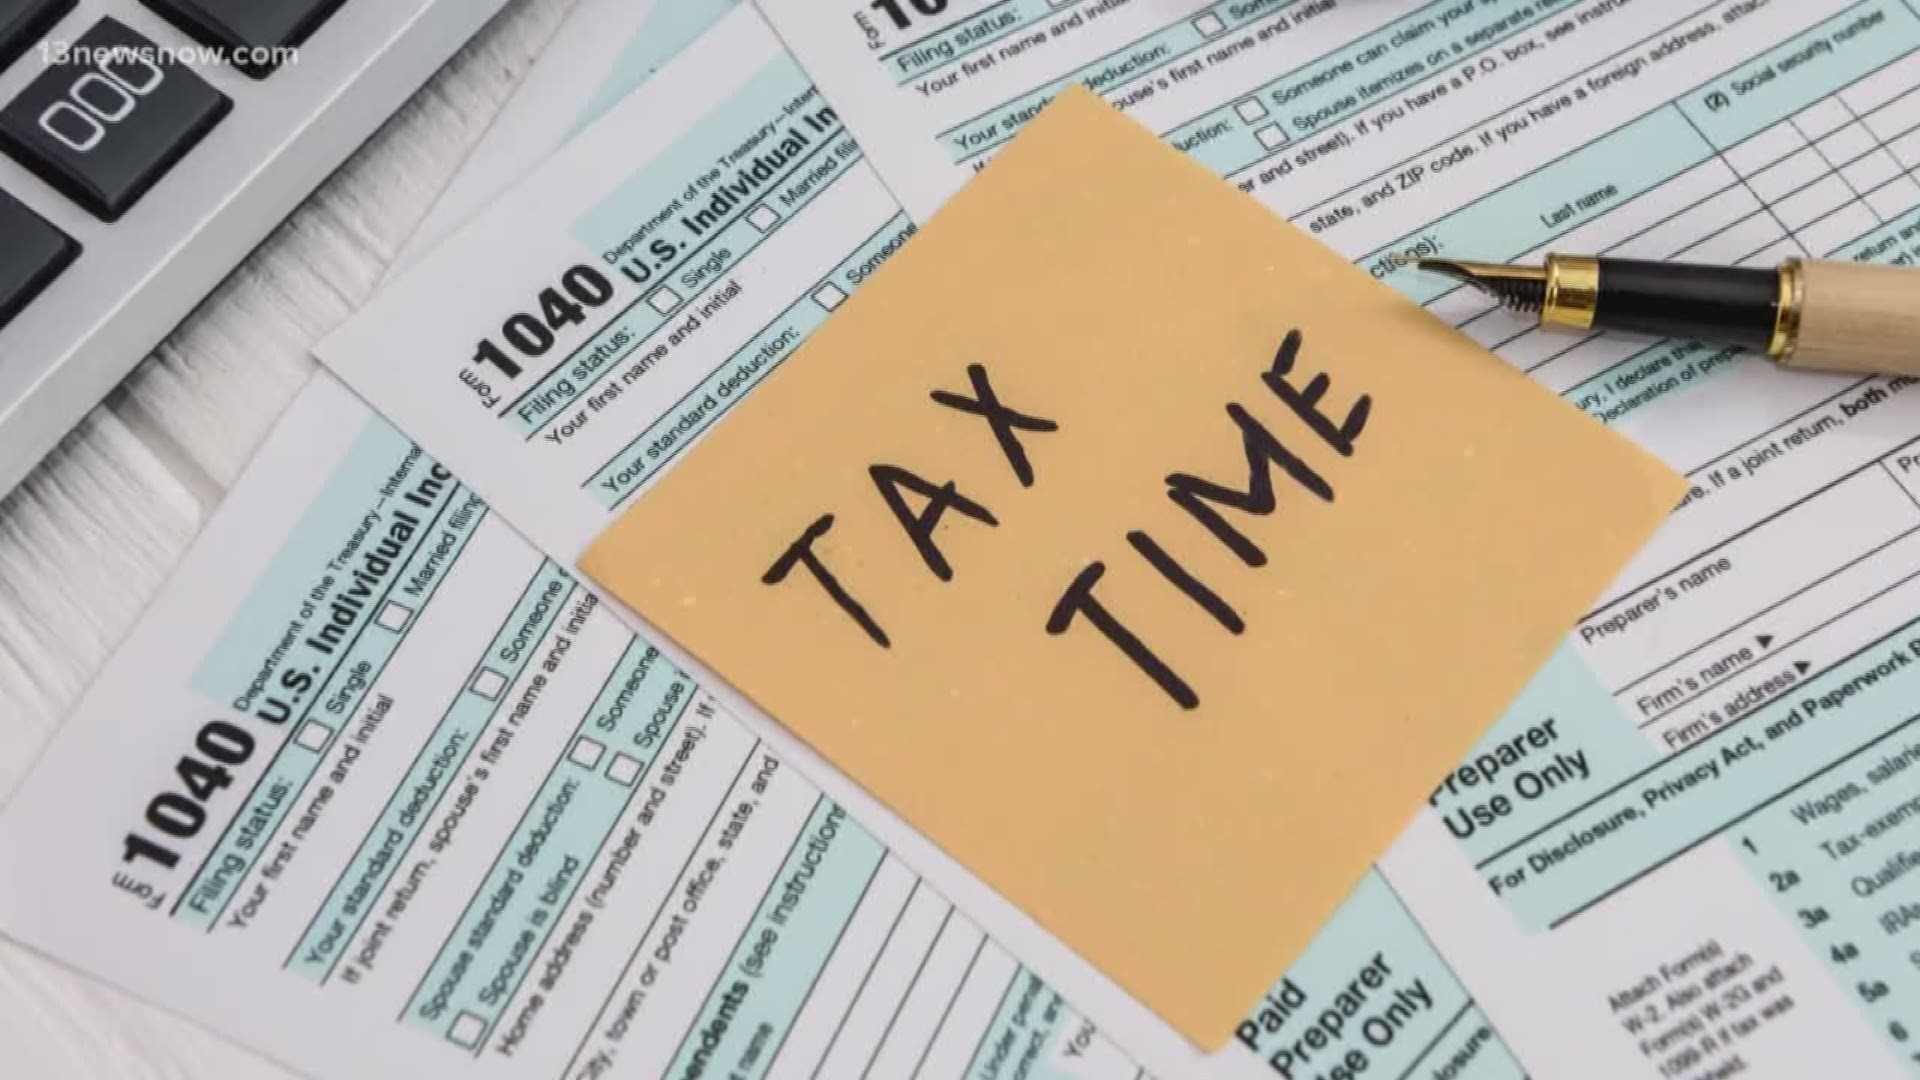 Benefits of filing your taxes early